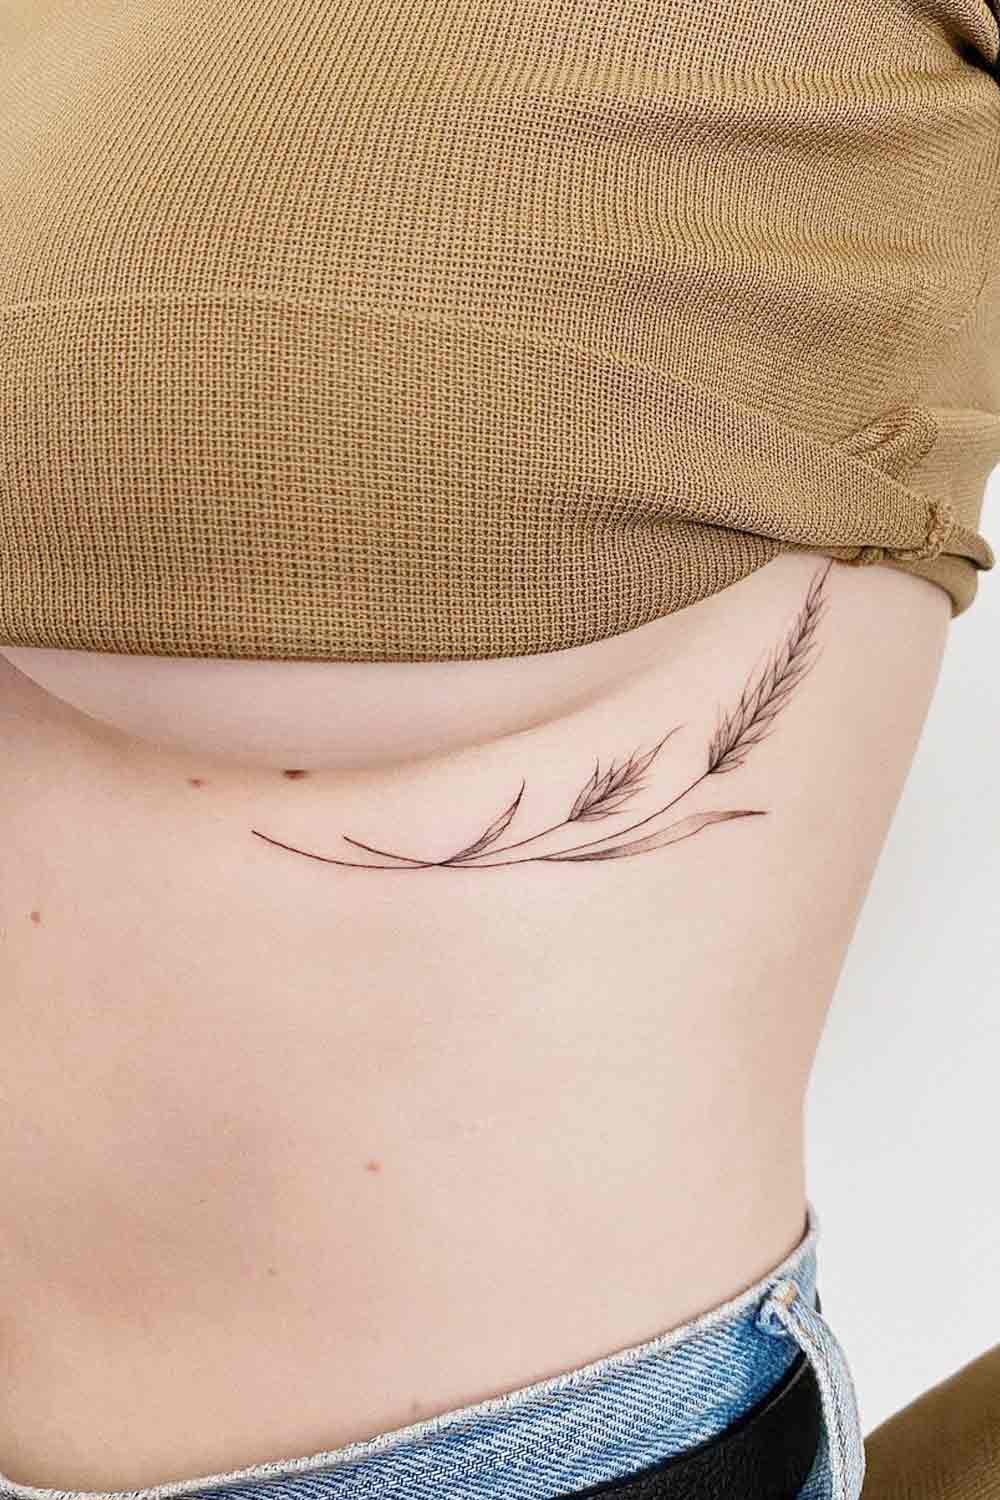 Chic and Delicate Underboob Tattoos